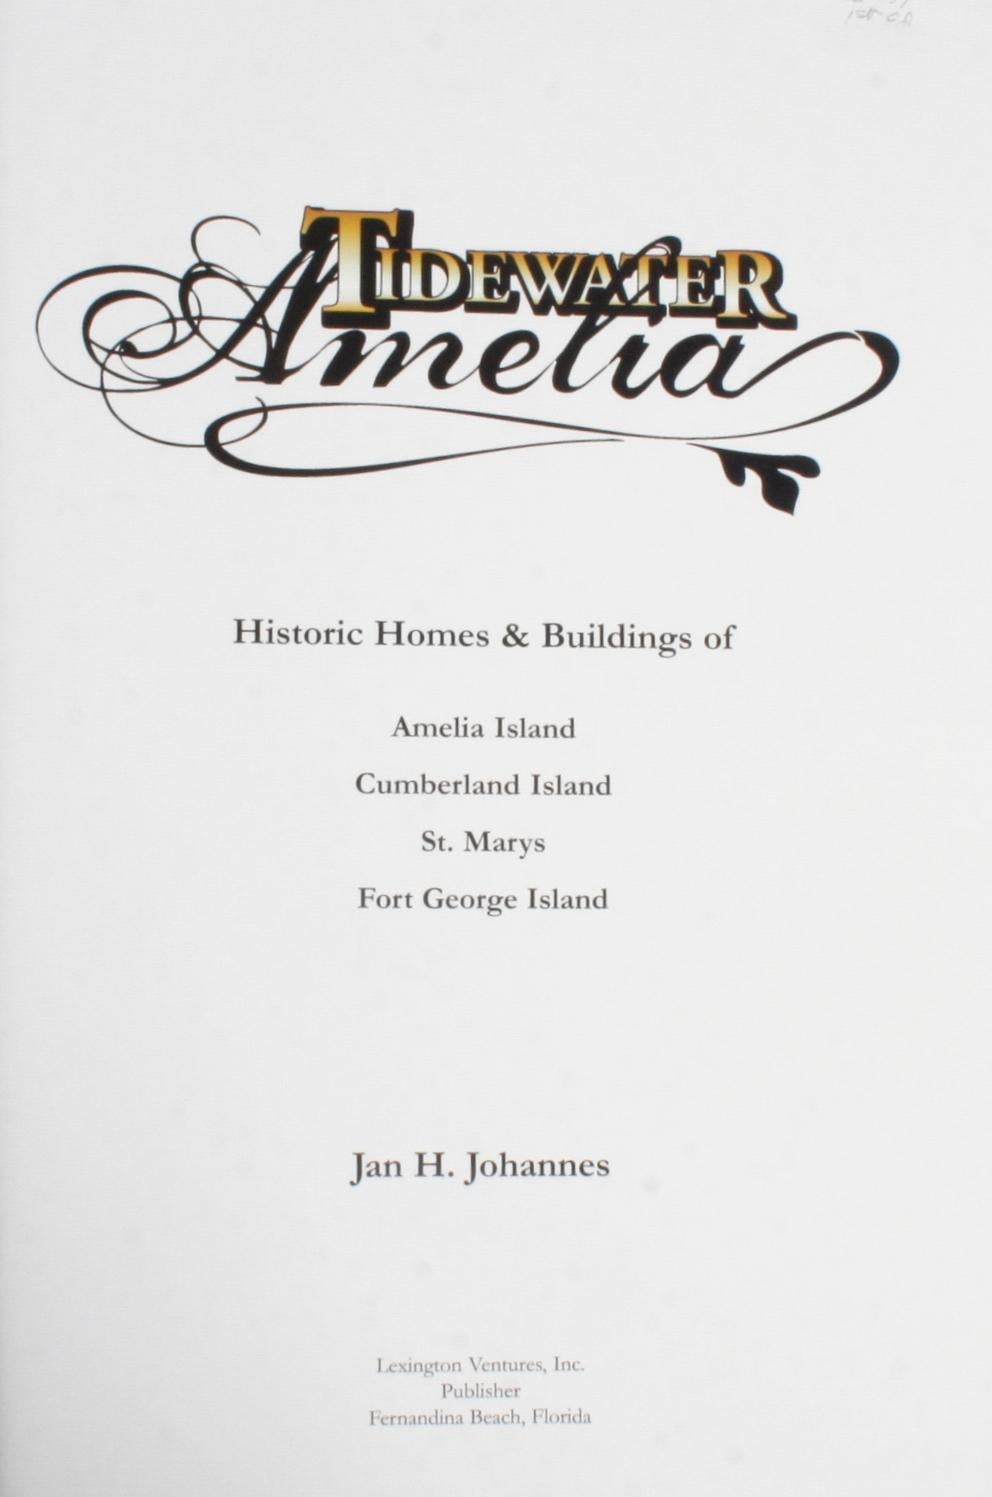 Tidewater Amelia by Jan H. Johannes. Fernandia Beach: Lexington Ventures, Inc., 2007. Hardcover with slip case, 188 pp. A beautiful book showcasing the interiors of historic homes and architecture on Amelia Island, Cumberland Island, St. Maries and